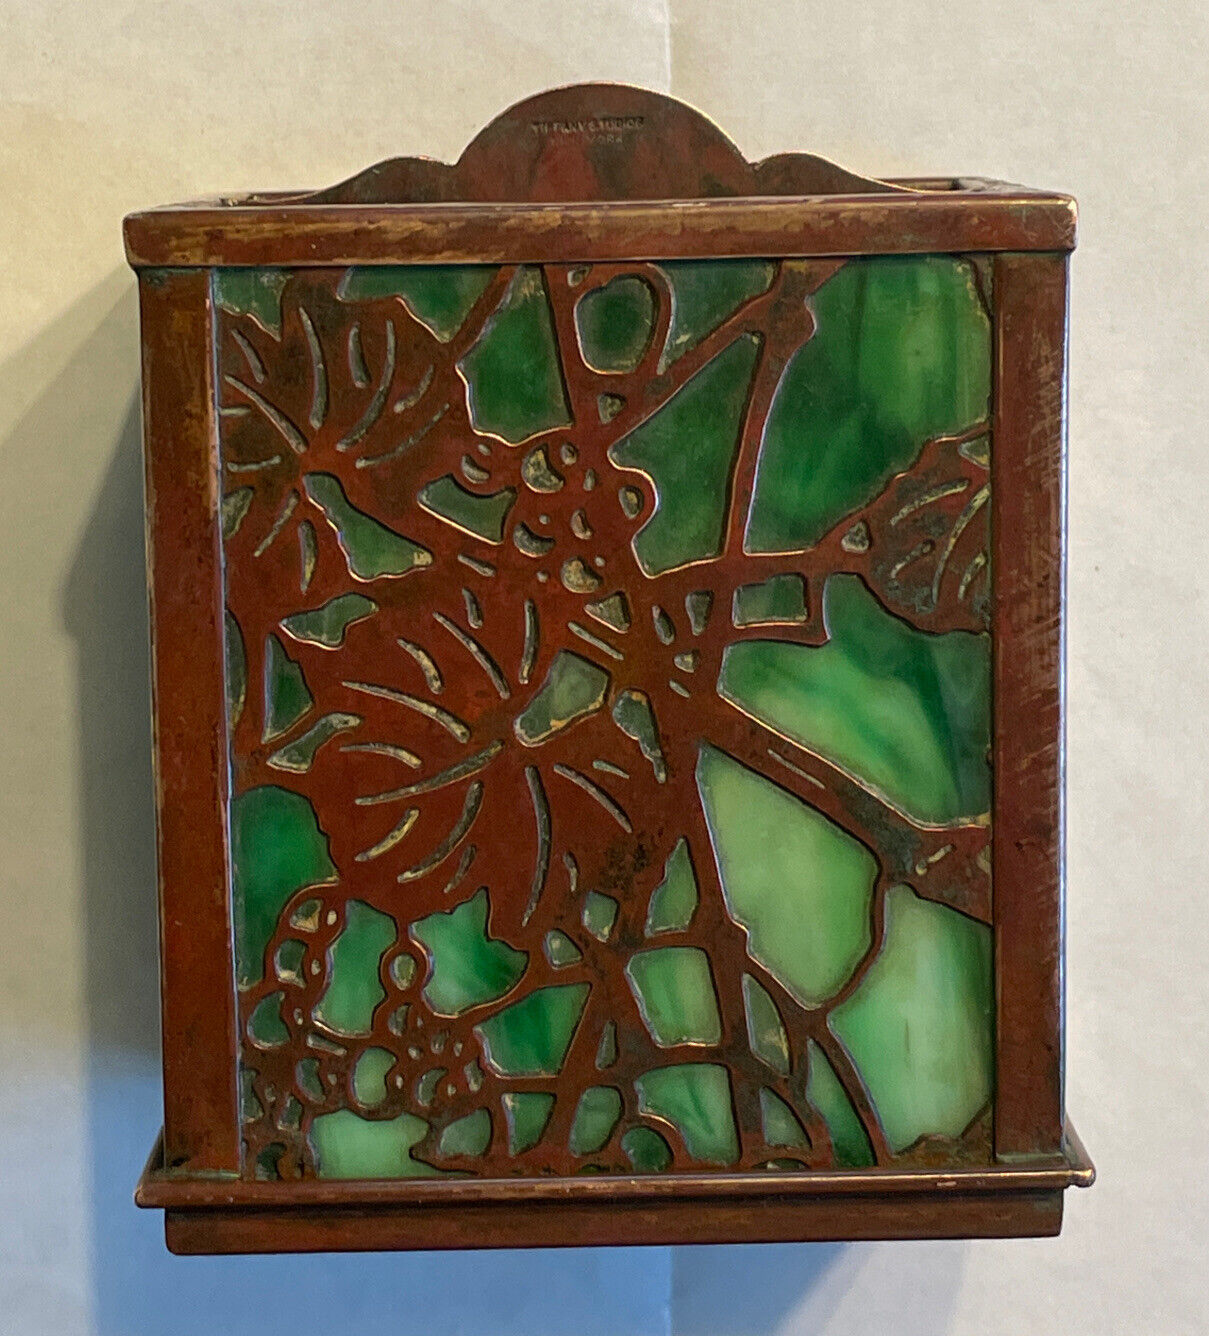 Antique Tiffany Studios NY Grapevine Pattern Double Deck Card Case w/Green Glass